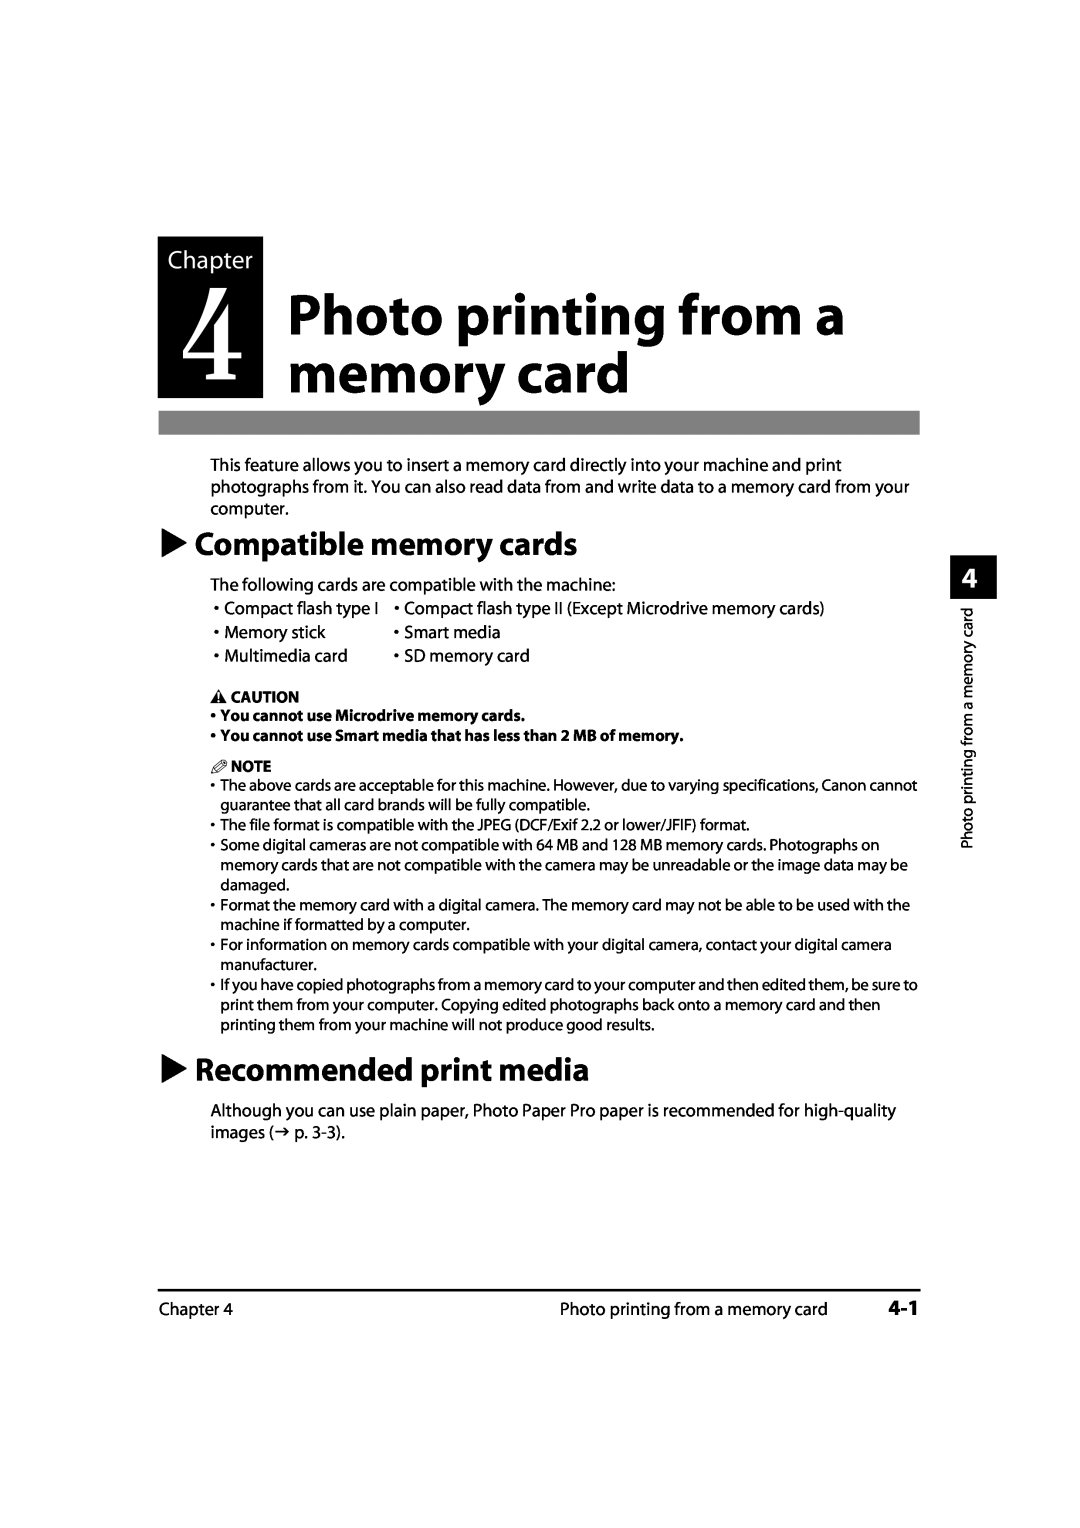 Canon 730i, MultiPASS MP730 Photo printing from a memory card, Compatible memory cards, Recommended print media, Chapter 